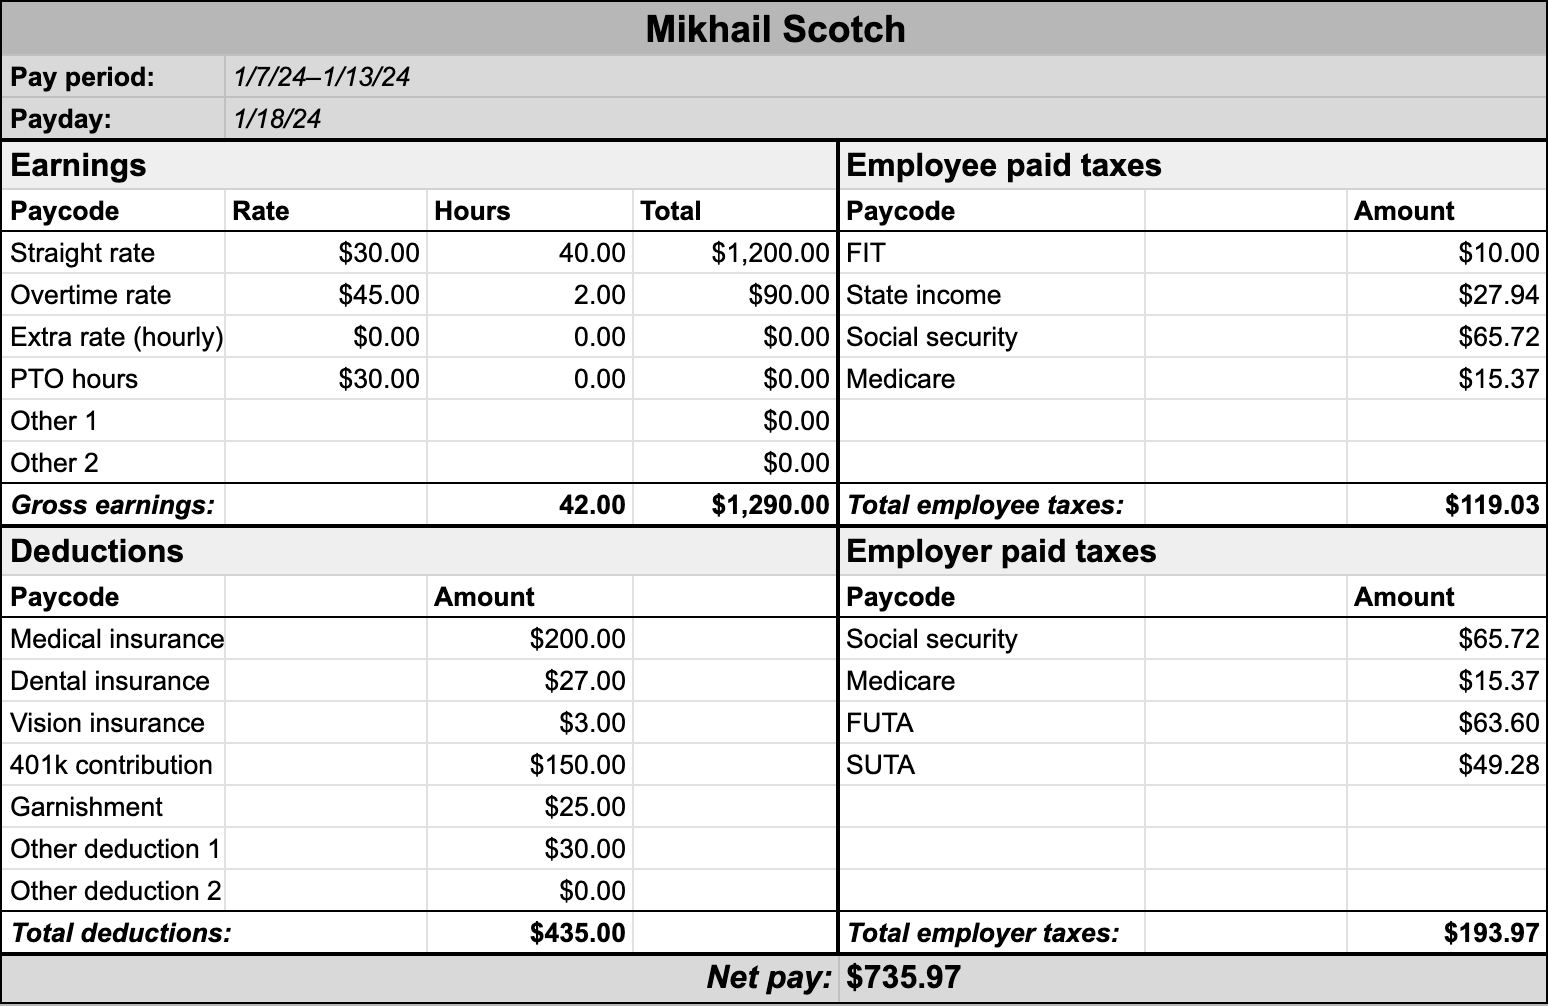 A spreadsheet displays Mikhail Scotch's January 18, 2024 paycheck data, including calculations for gross earnings, employee taxes, deductions, employer taxes, and net pay.